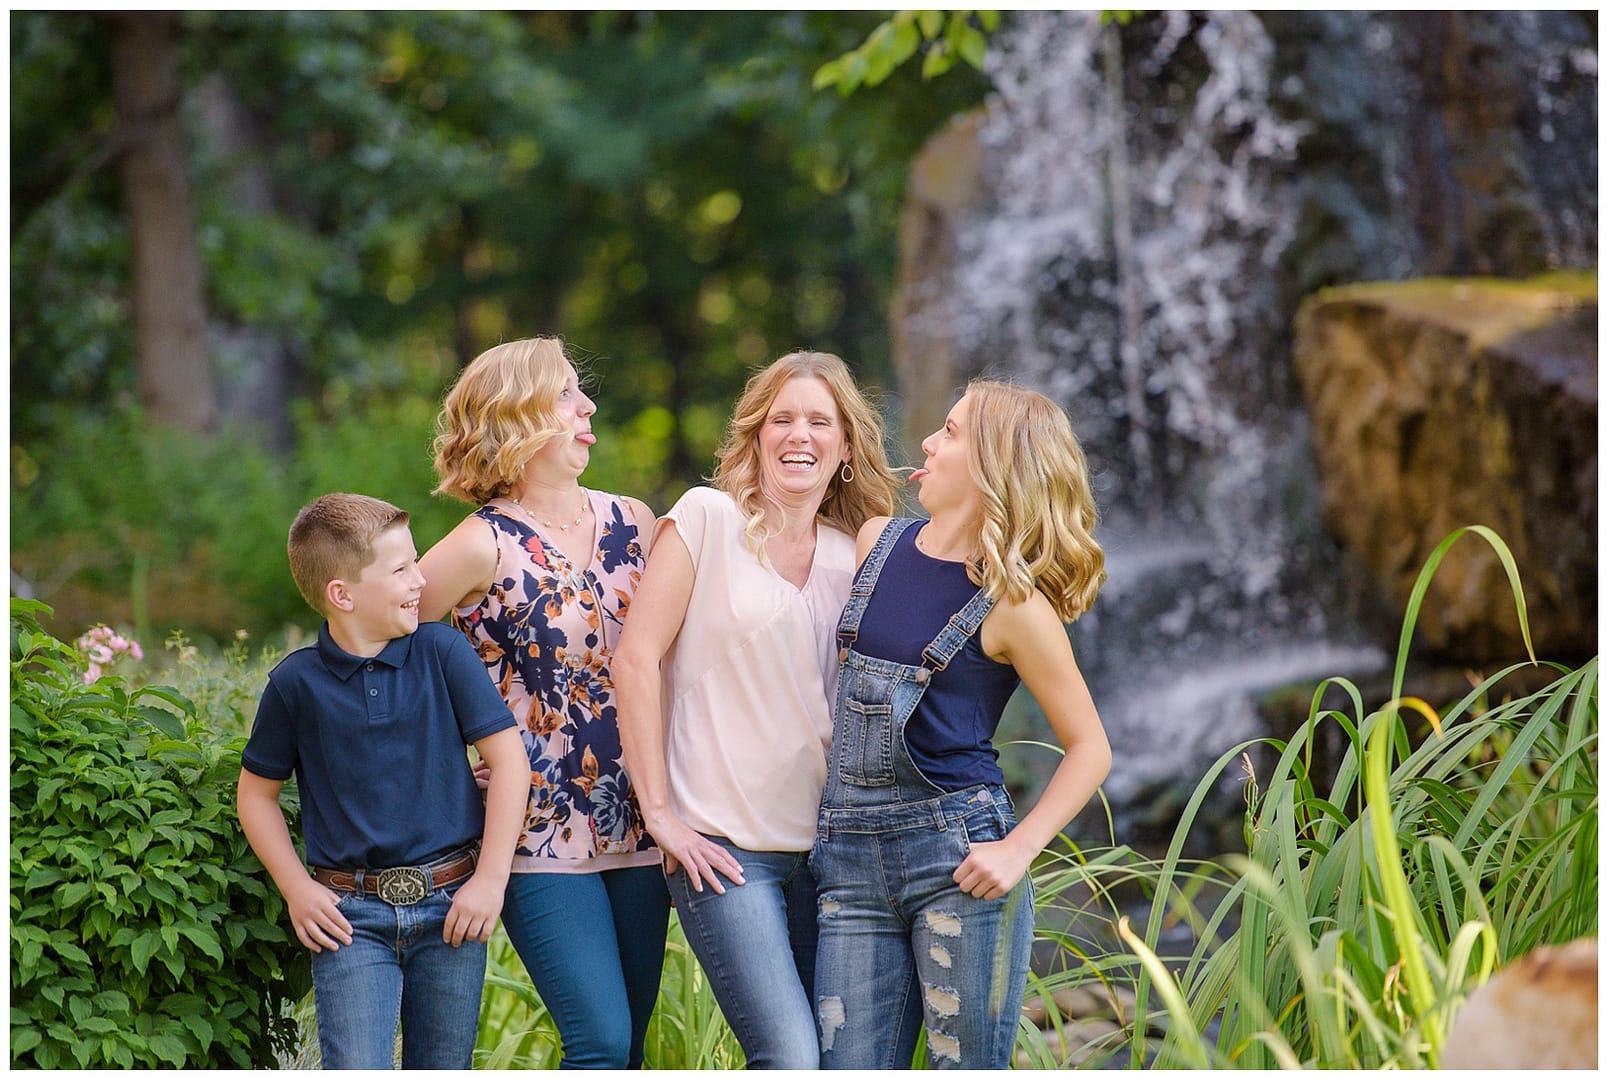 Family laughs during Boise family session. Photos by Tiffany Hix Photography.